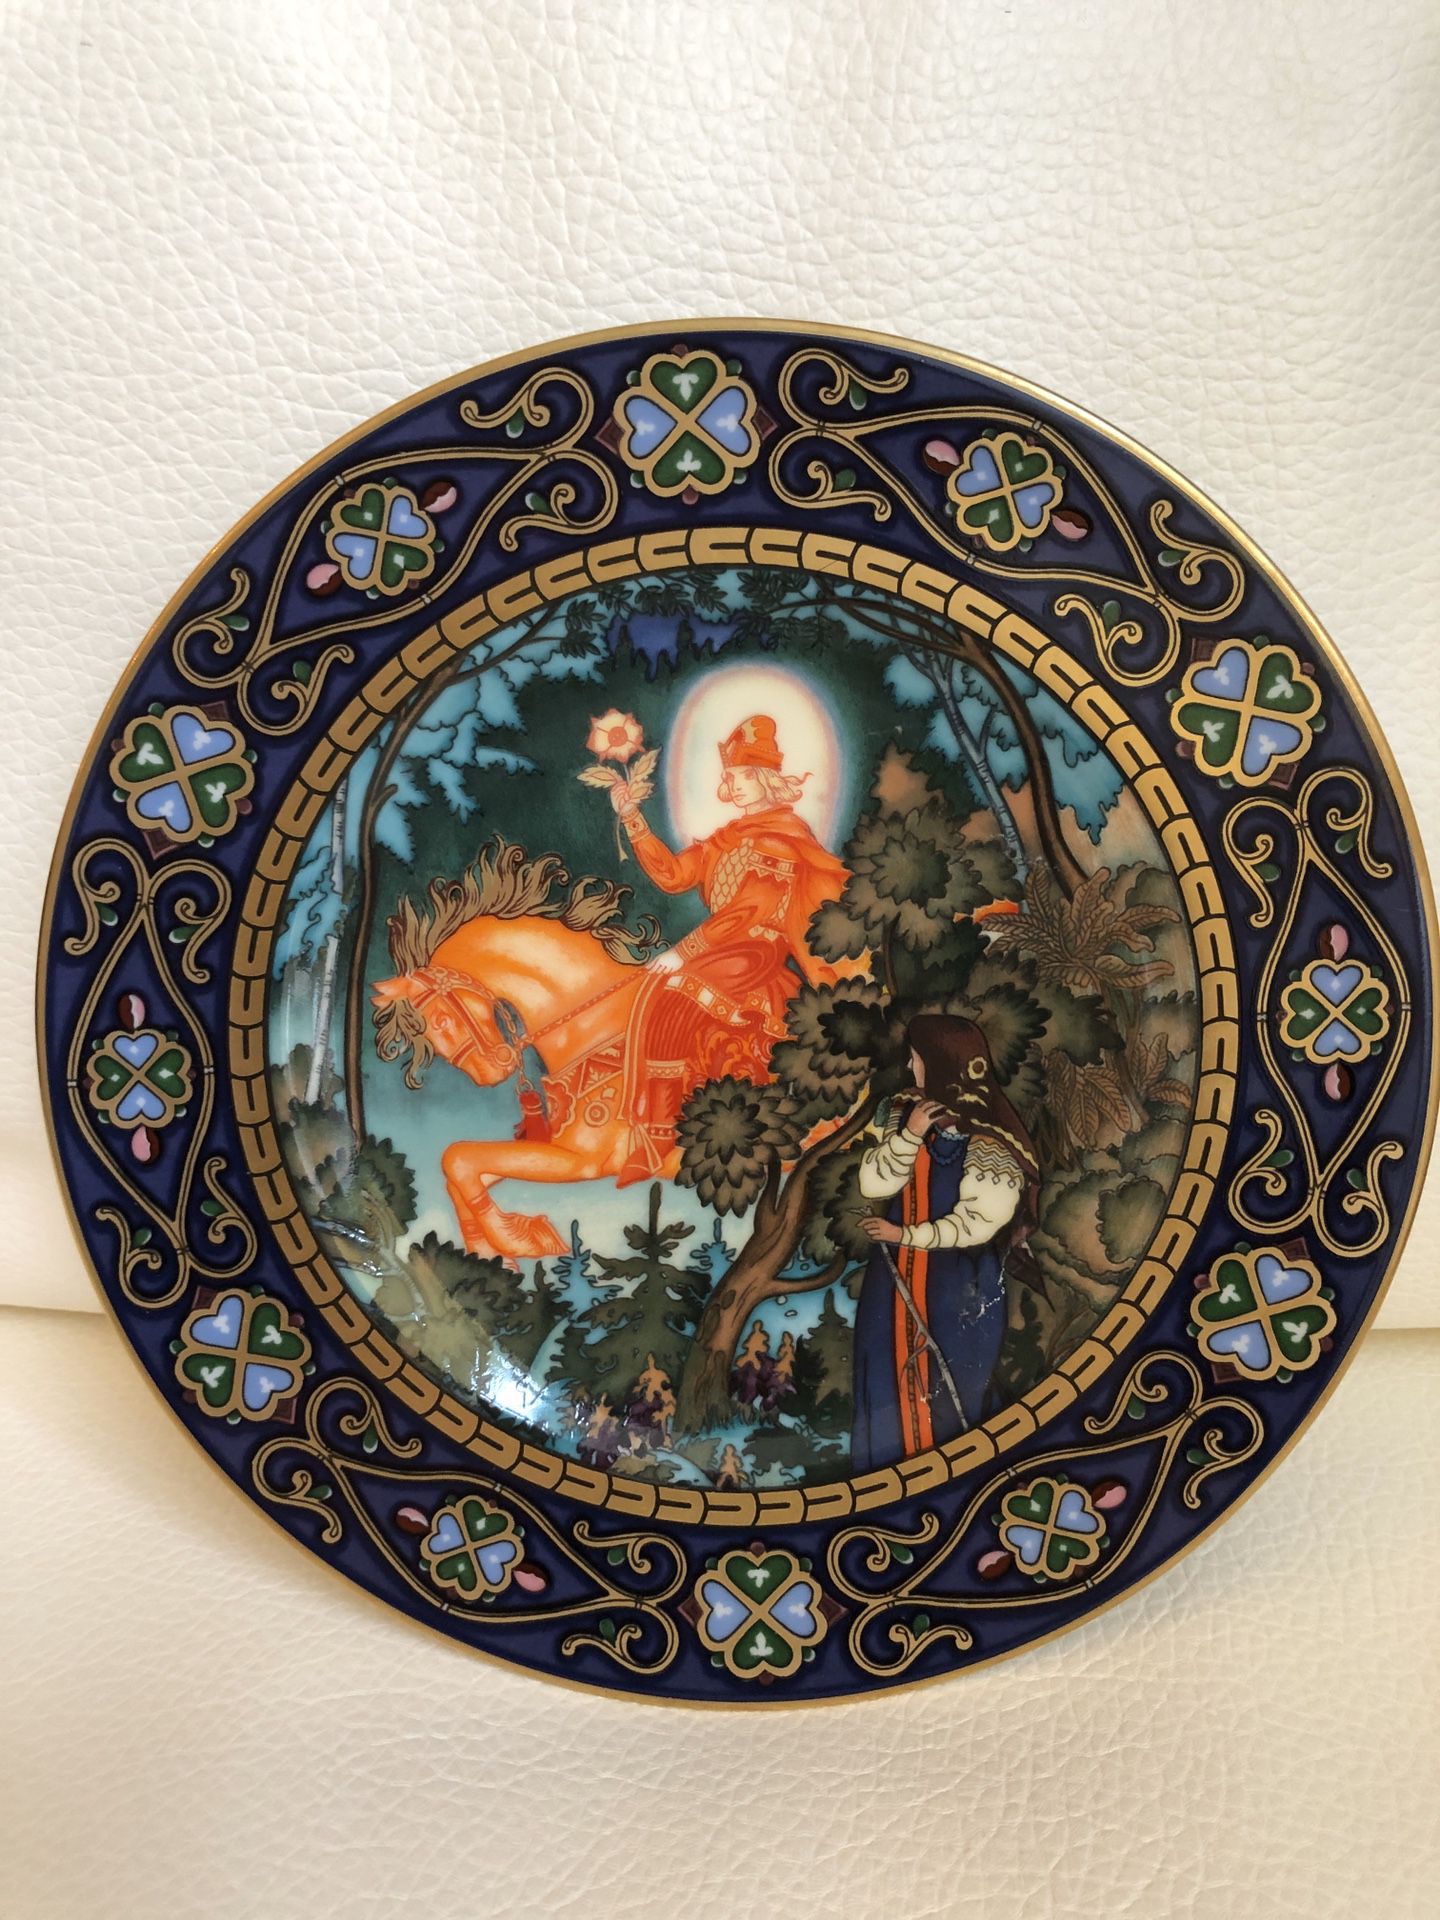 Rare Hand-Painted German-Russian Plates